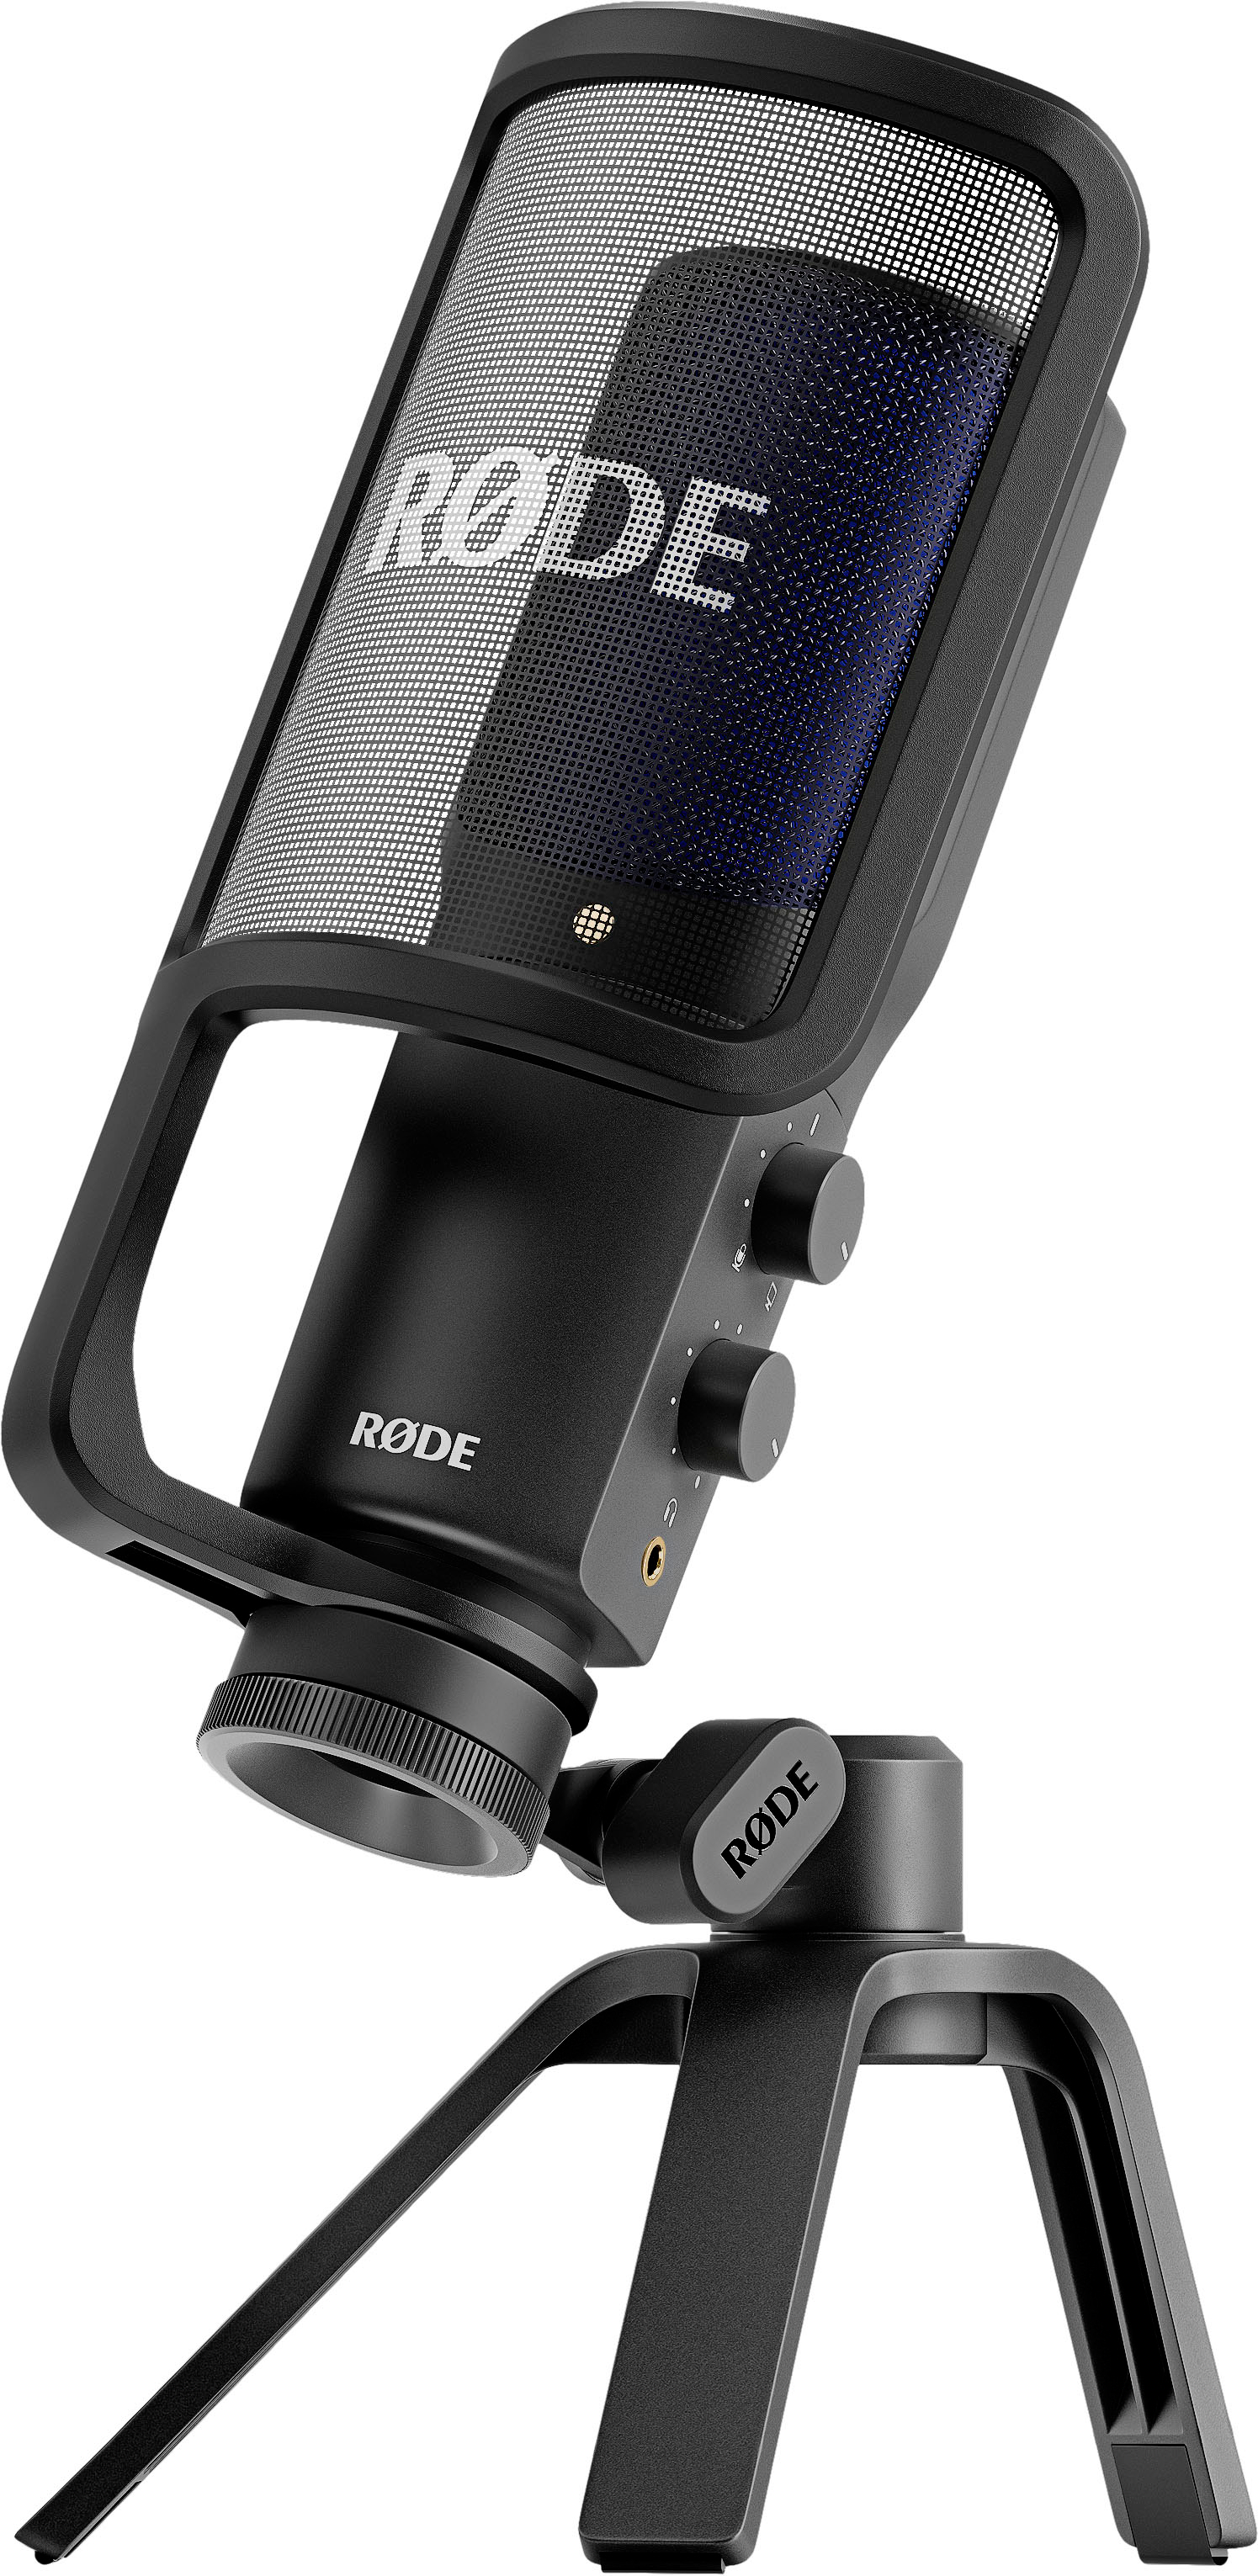 RØDE NT-USB+ Wired Condenser Microphone with USB Type-C NTUSB+ - Best Buy